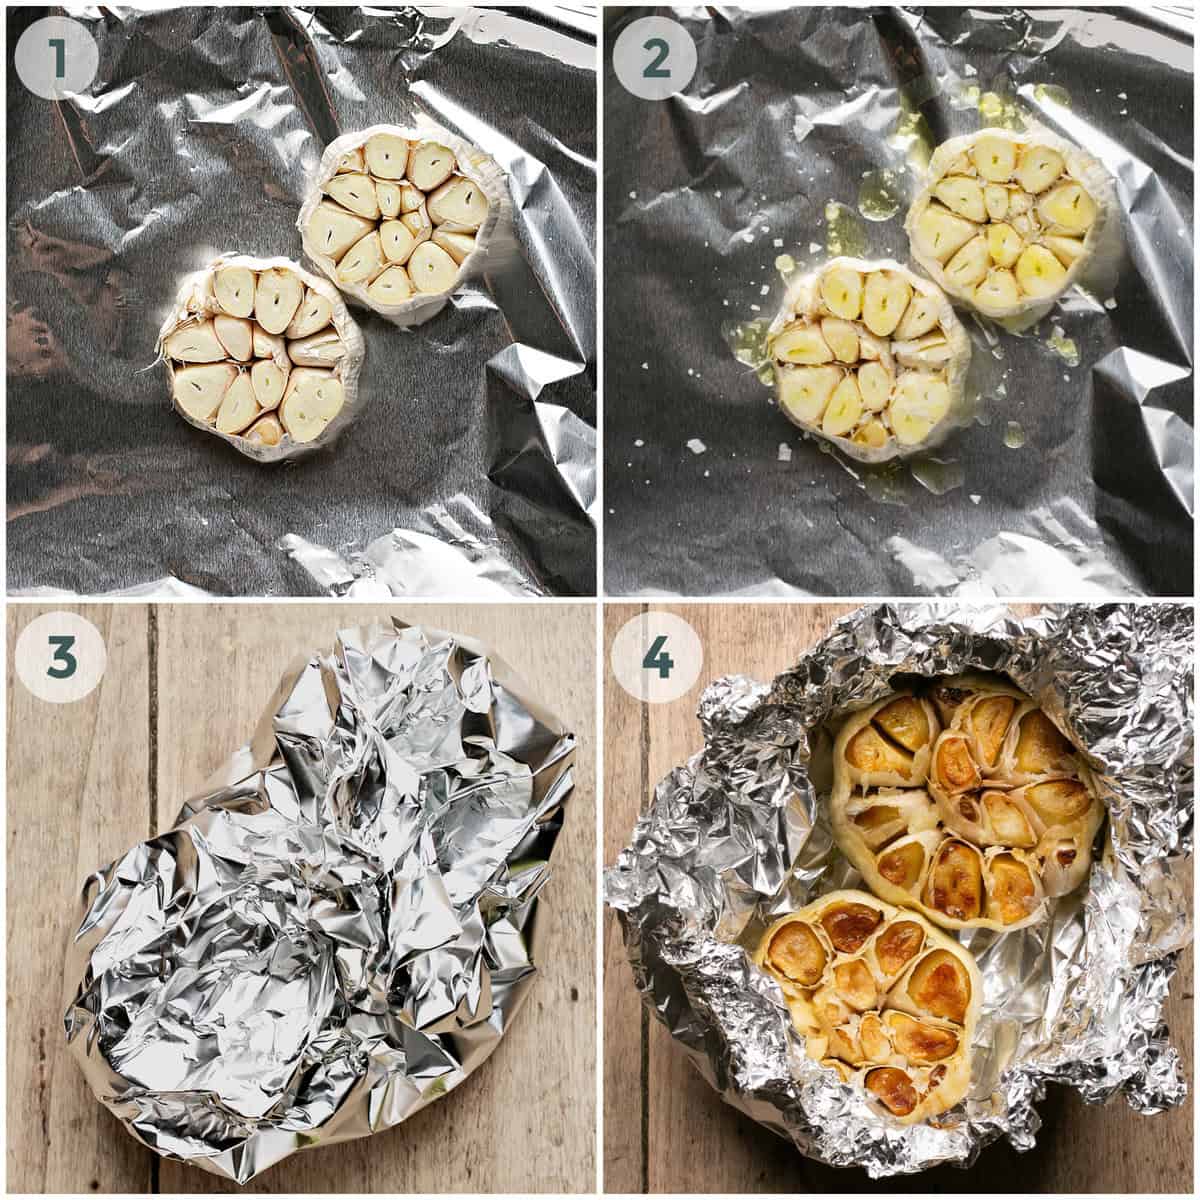 four steps showing how to roast garlic